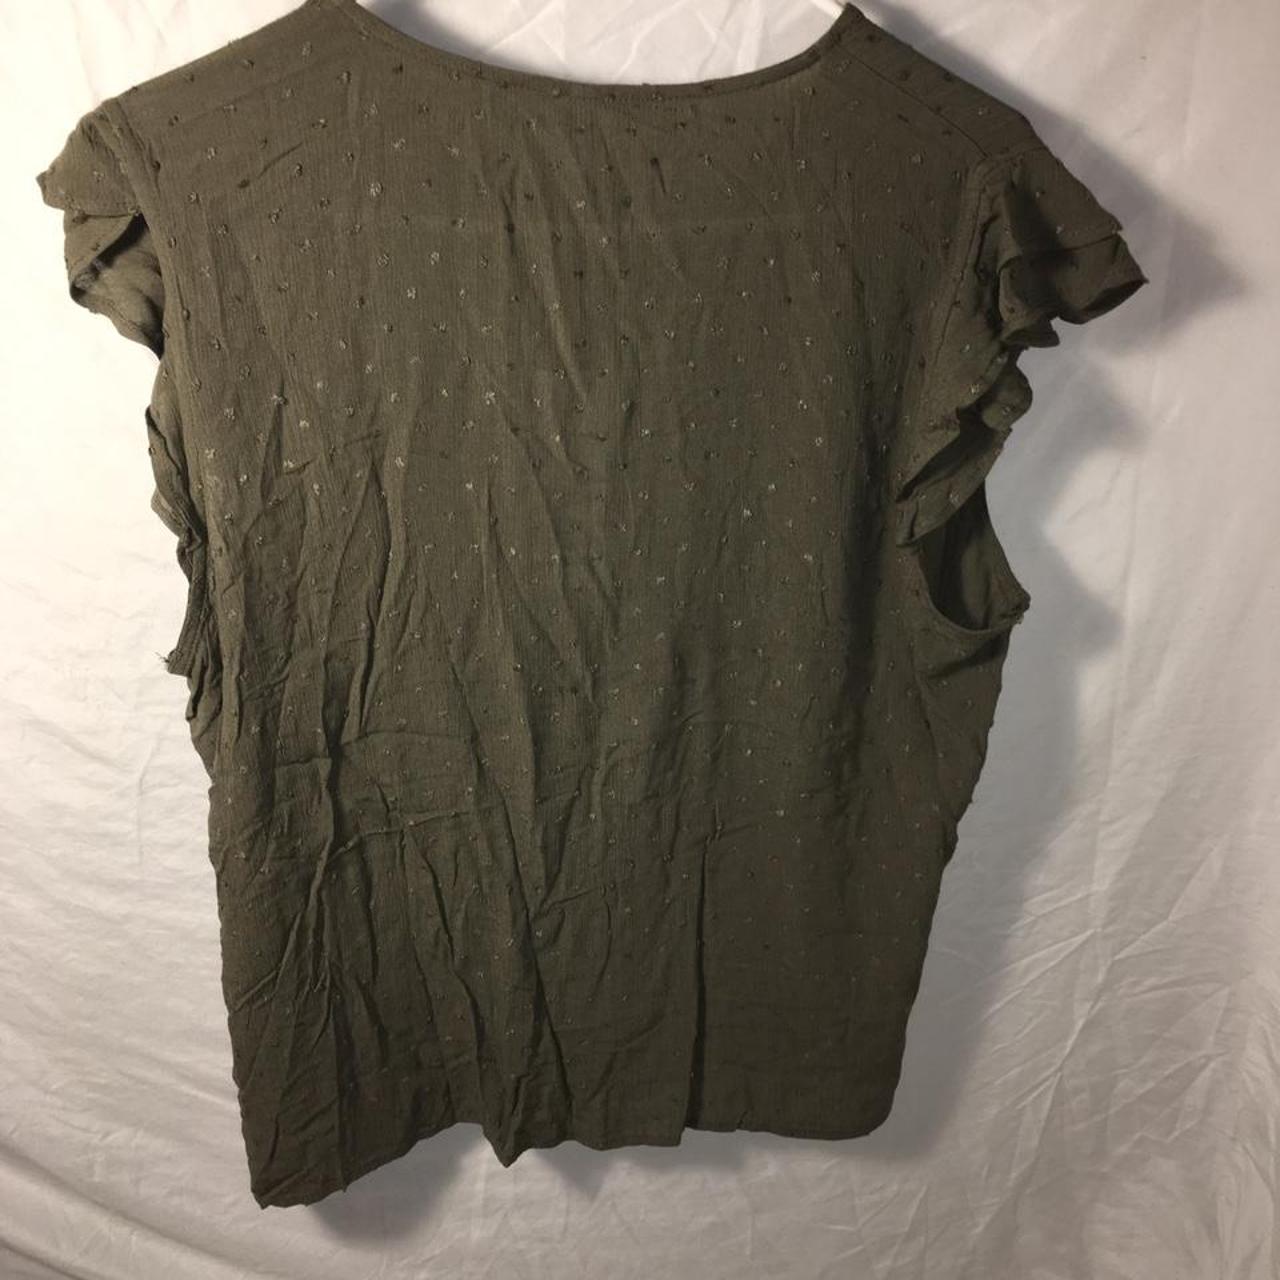 Product Image 2 - Olive green button down blouse